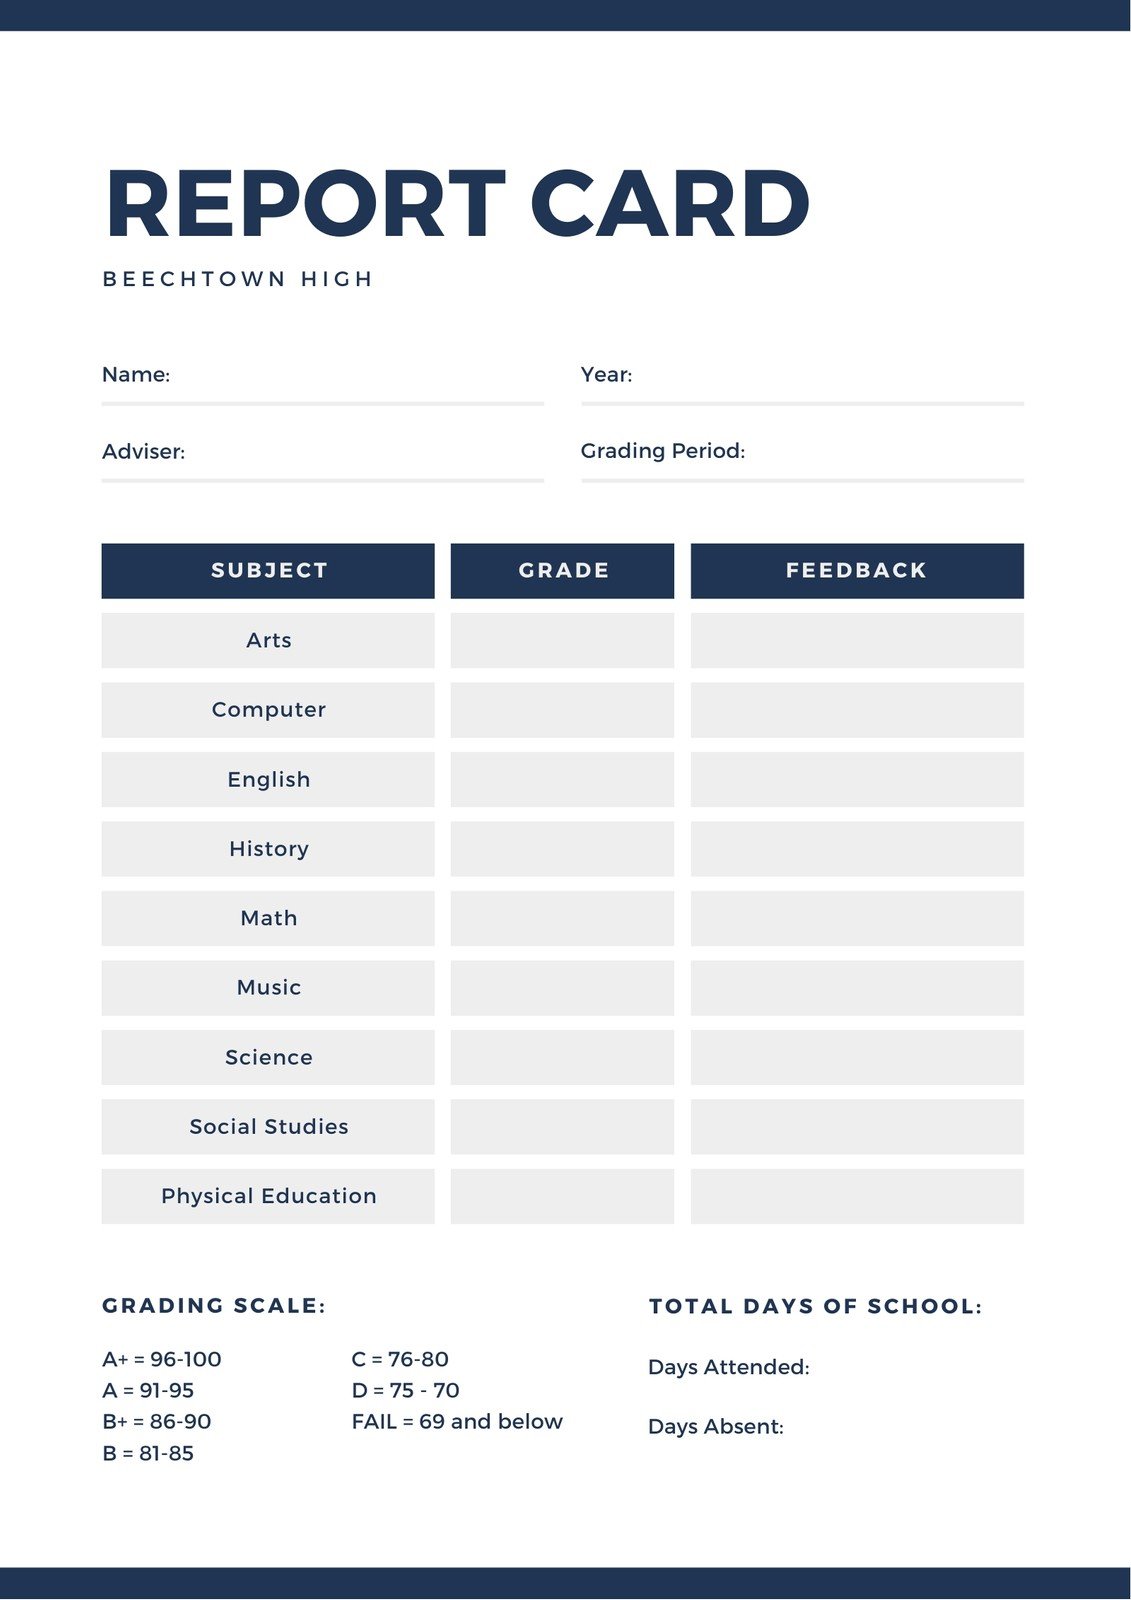 Customize 23+ High School Report Cards Templates Online - Canva For Report Card Template Pdf